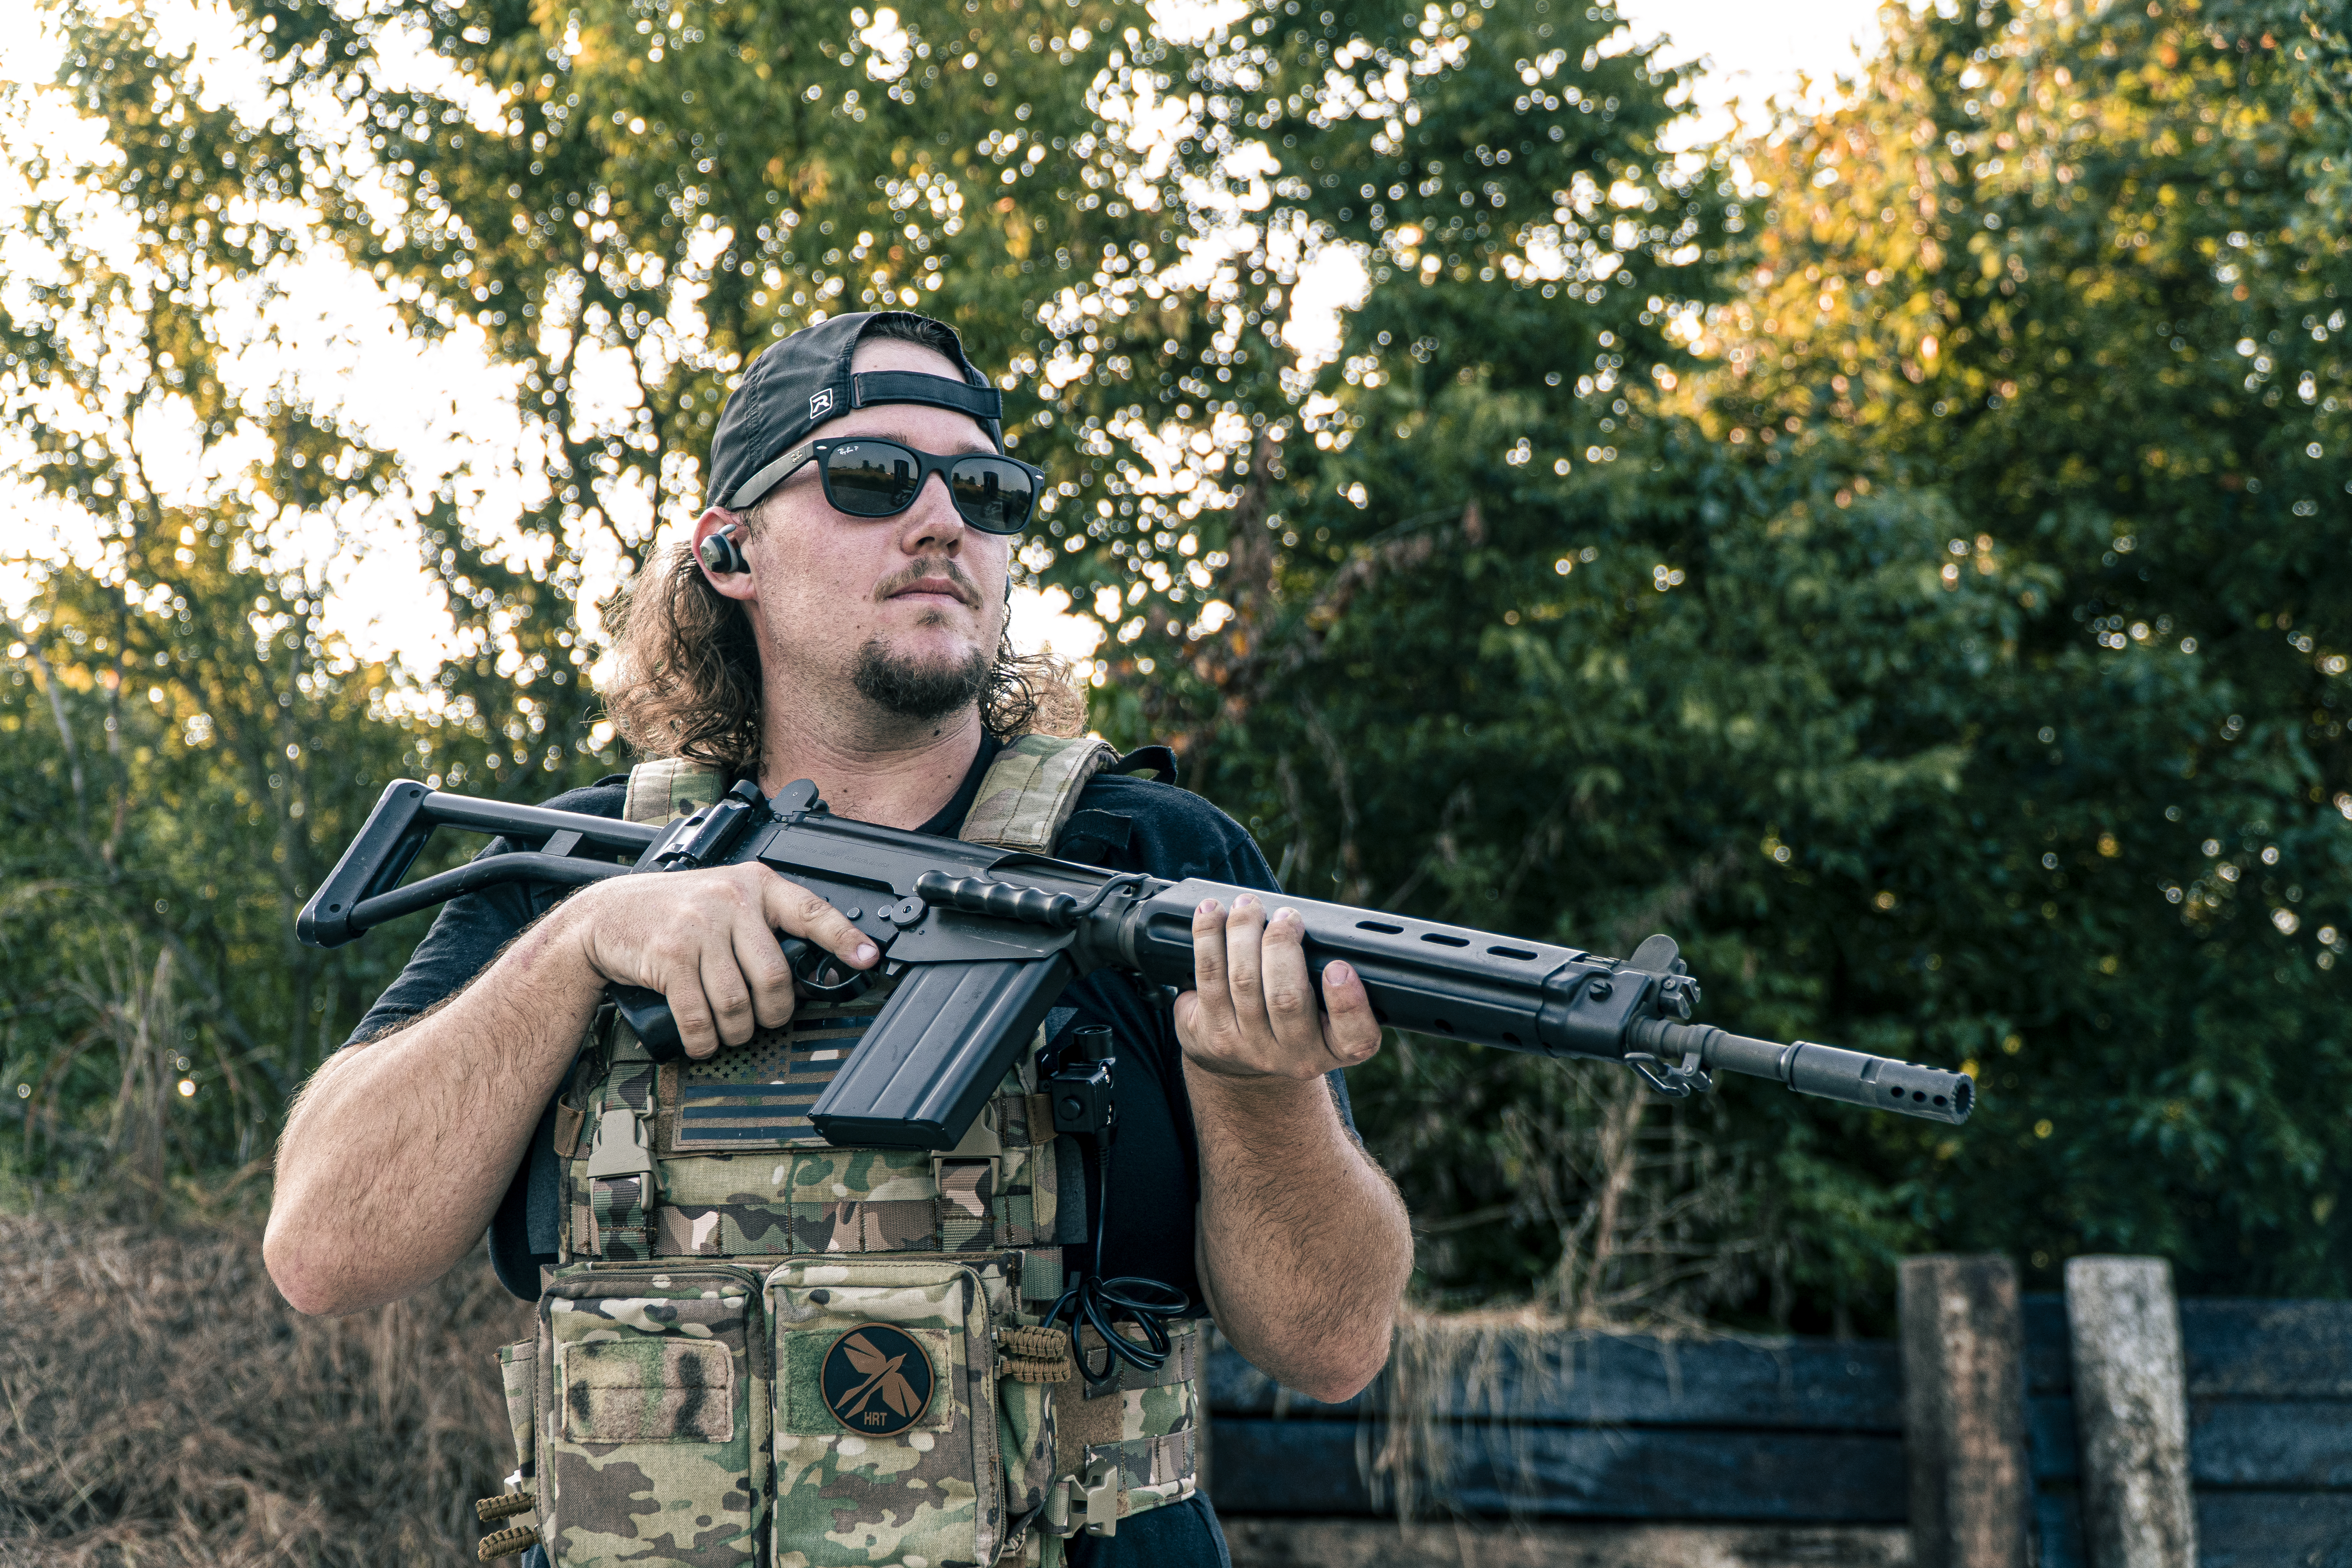 Man holding SAR 48 FAL against plate carrier